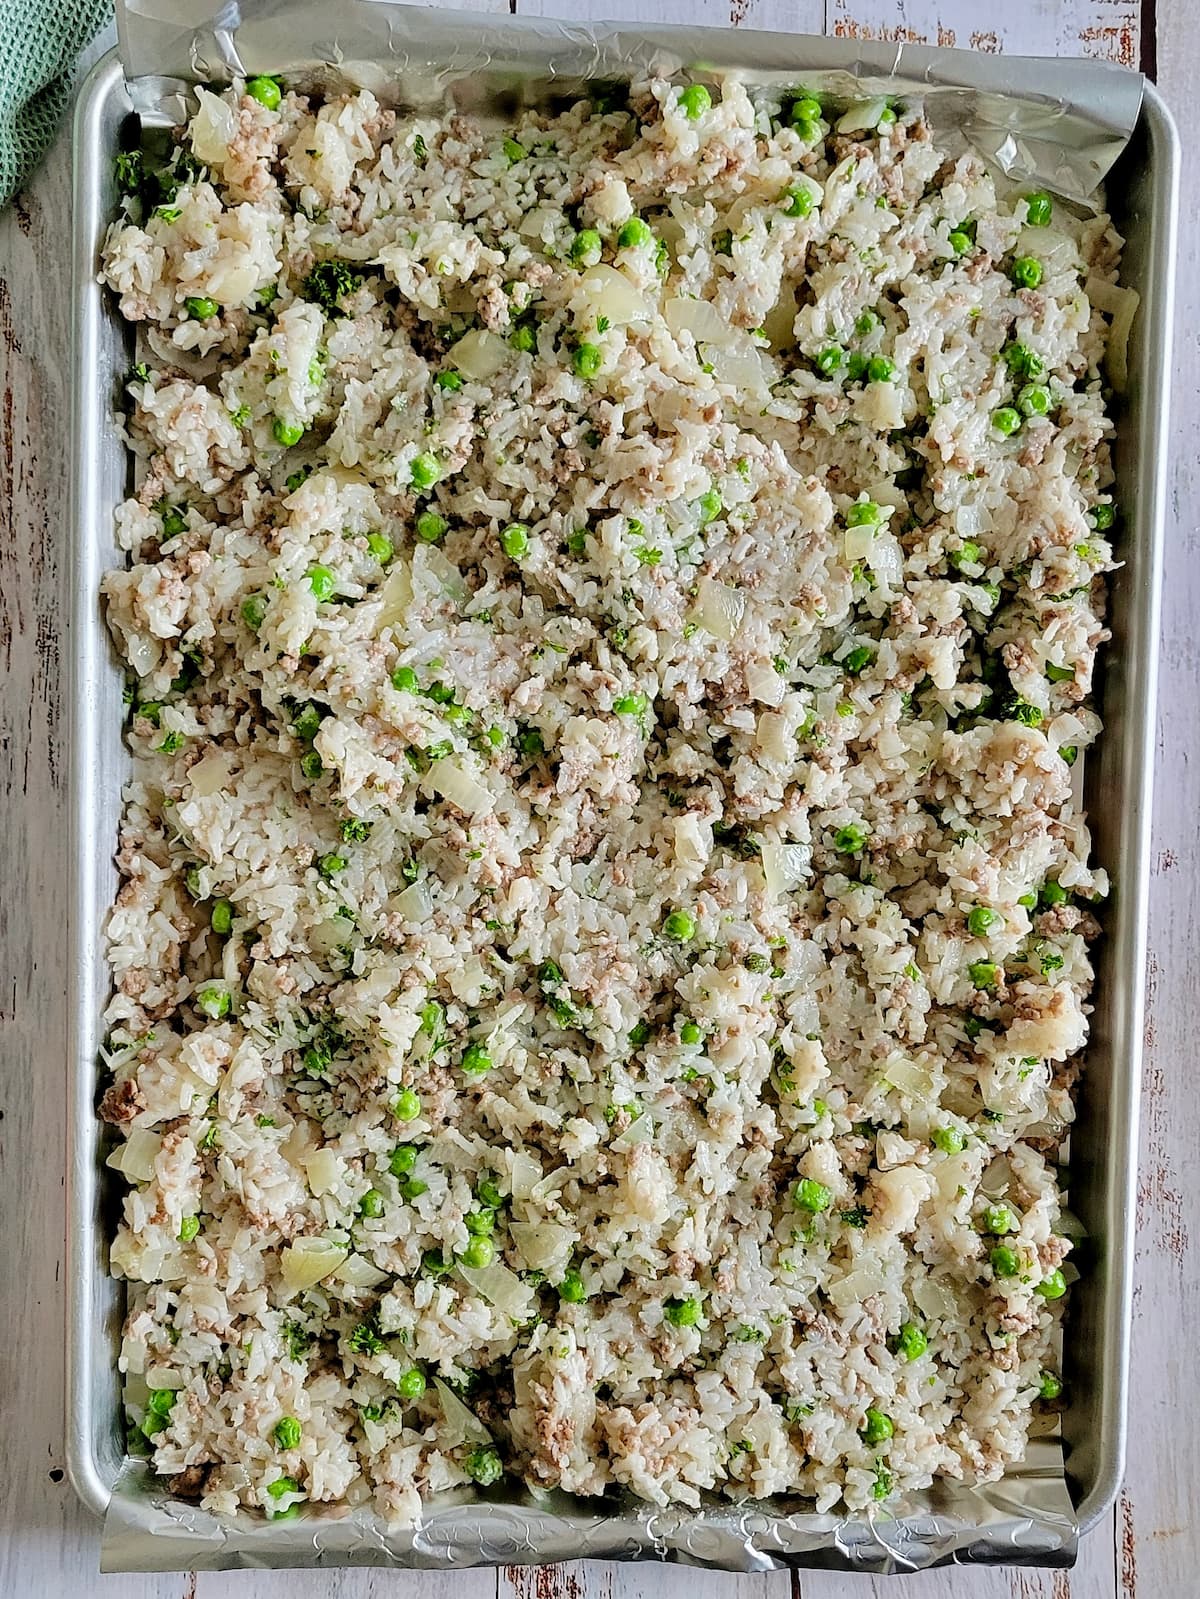 sheet pan of cooked rice, peas, onions and ground beef